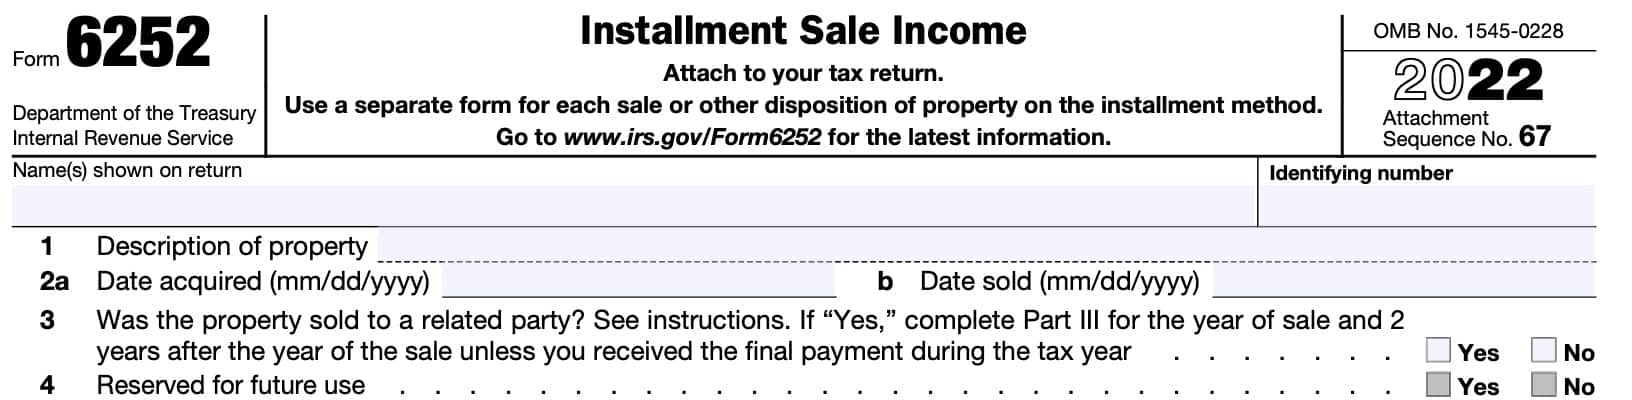 irs form 6252, installment sale income, top of form